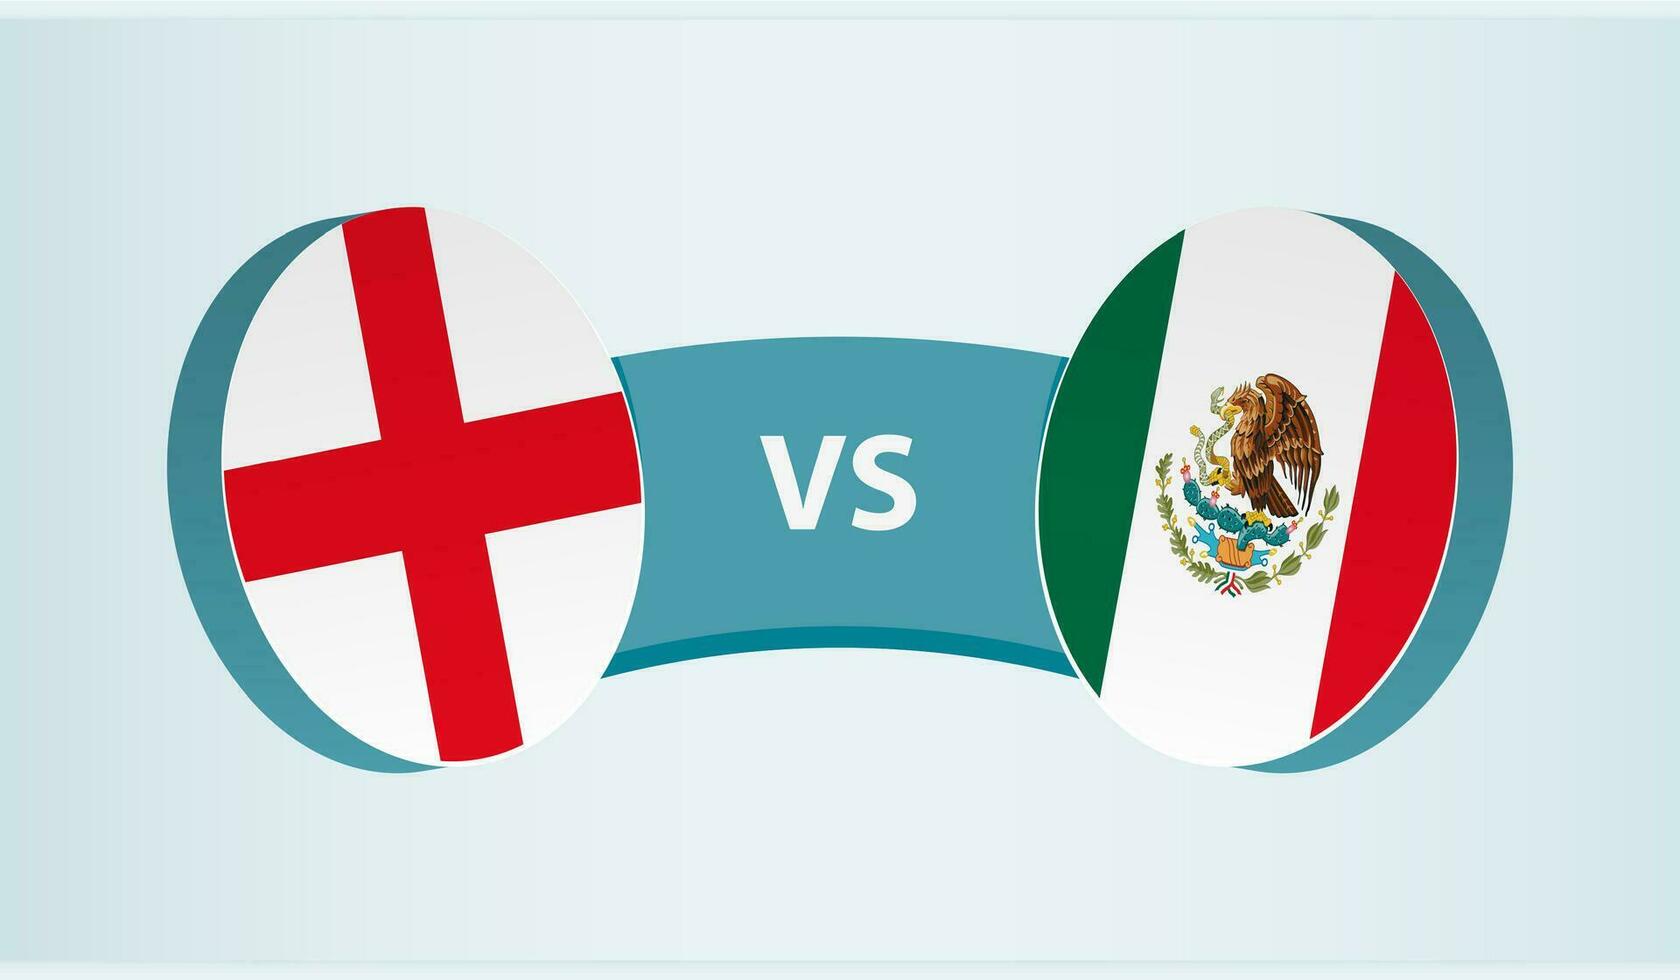 England versus Mexico, team sports competition concept. vector